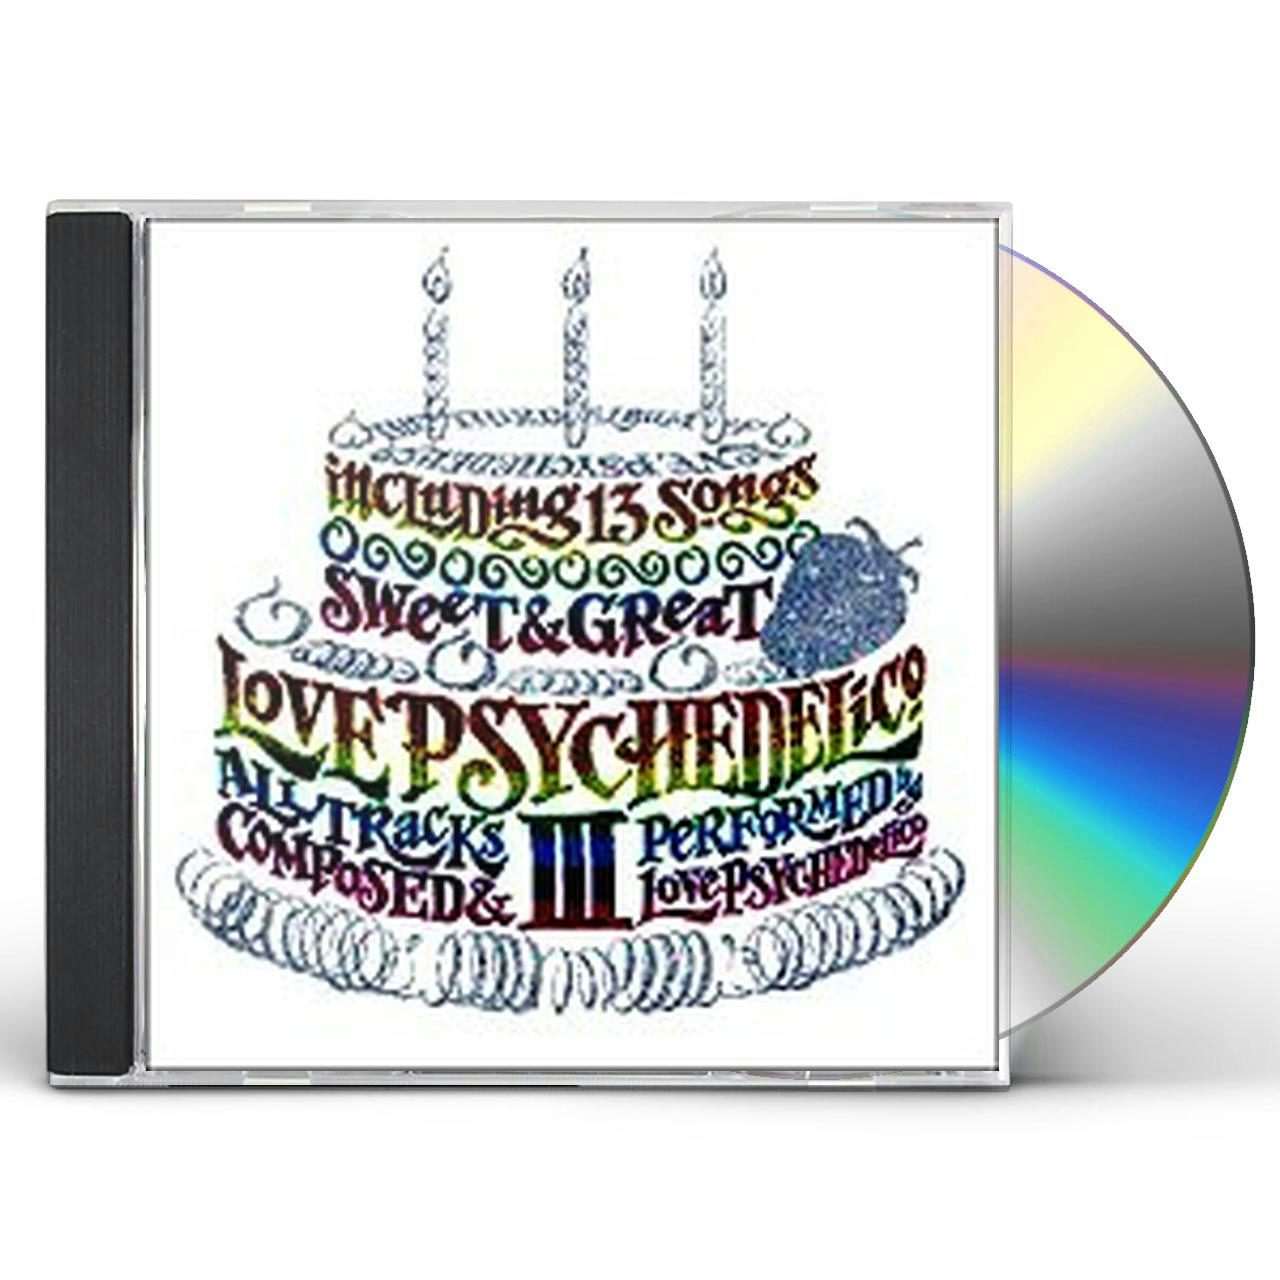 remasters box cd - LOVE PSYCHEDELICO